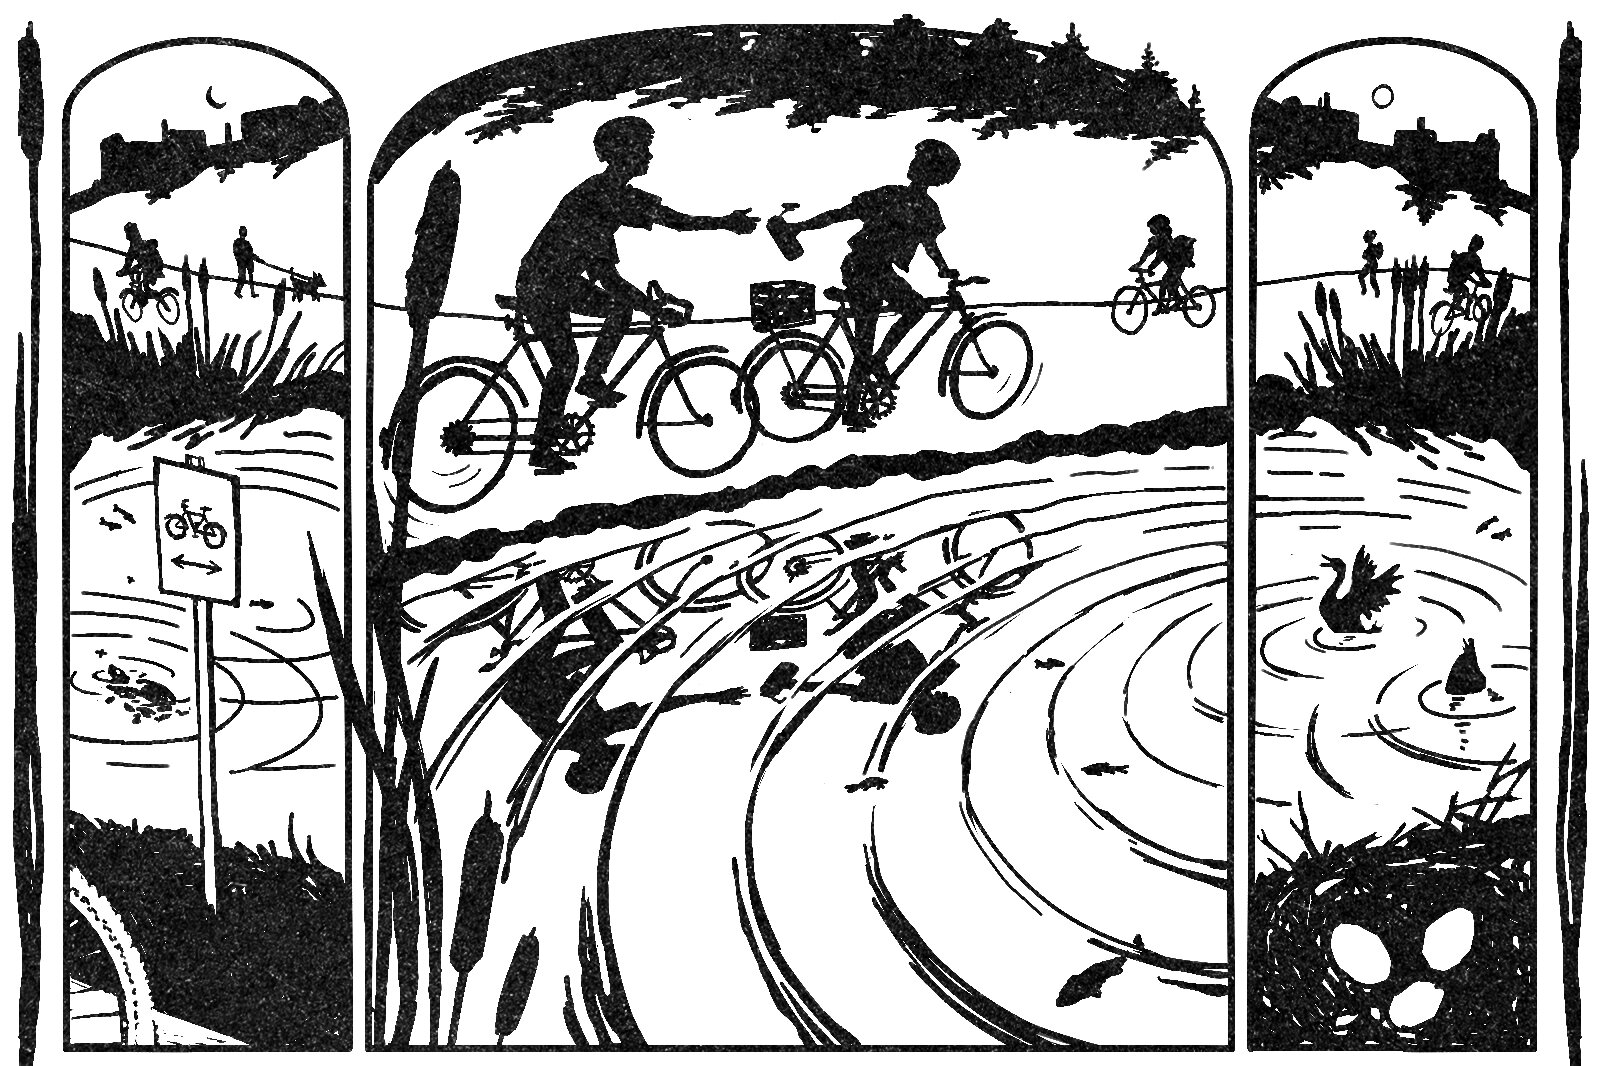 Series Teaser: Green Sabbath. Artist's comment: "People passing a reusable water bottle, using bikeways, reducing carbon emissions and vehicle pollution run-off into a nearby wetland habitat."